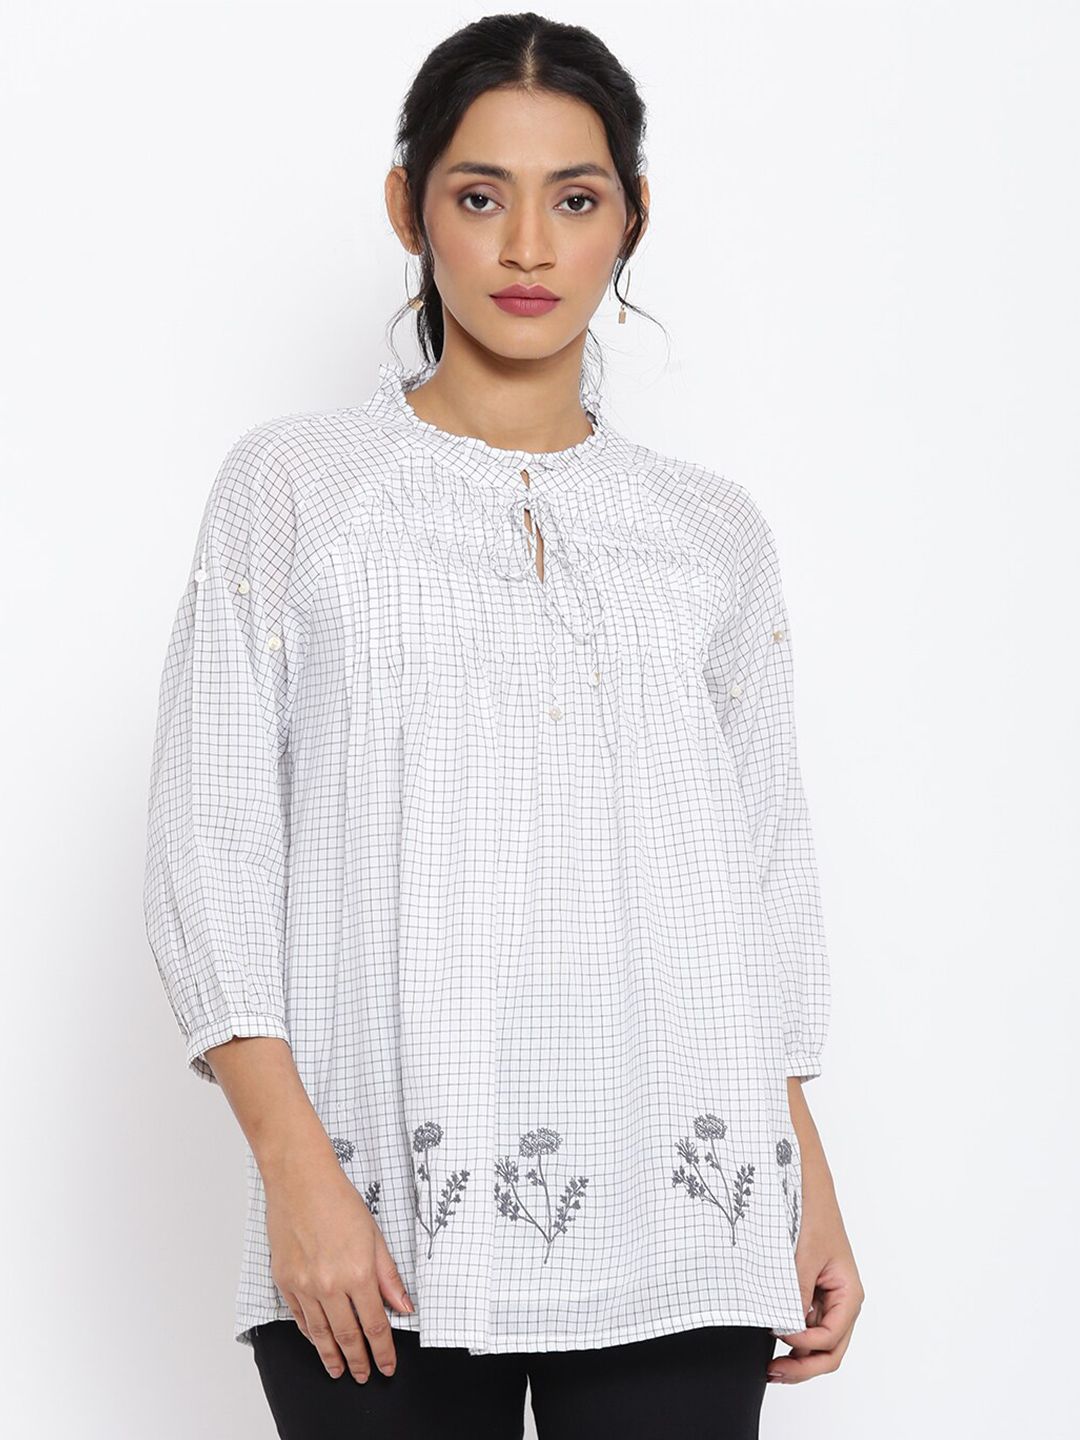 W White Checked Tie-Up Neck Top Price in India